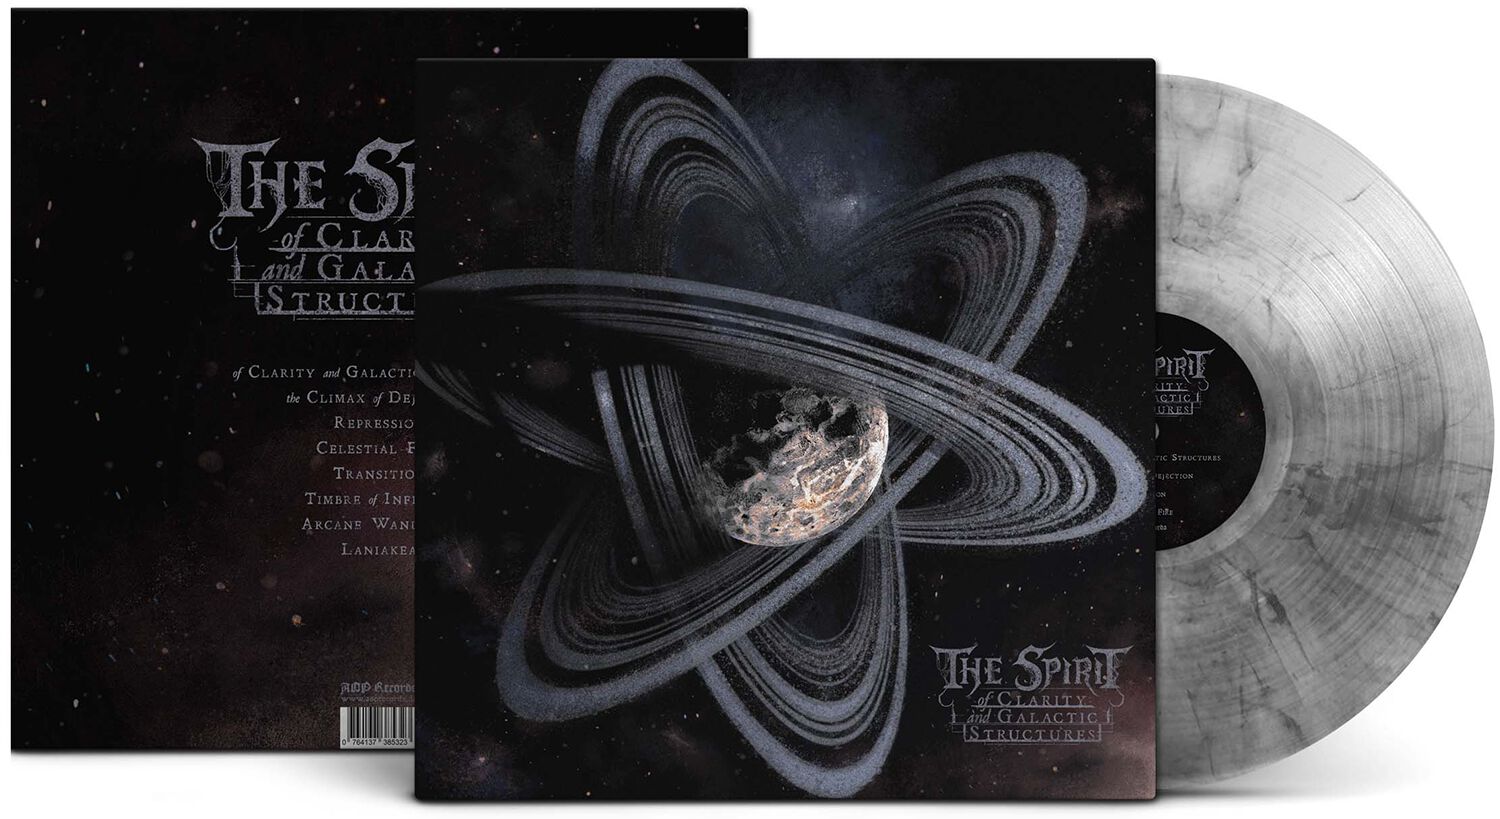 Image of The Spirit Of Clarity and galactic structures LP farbig